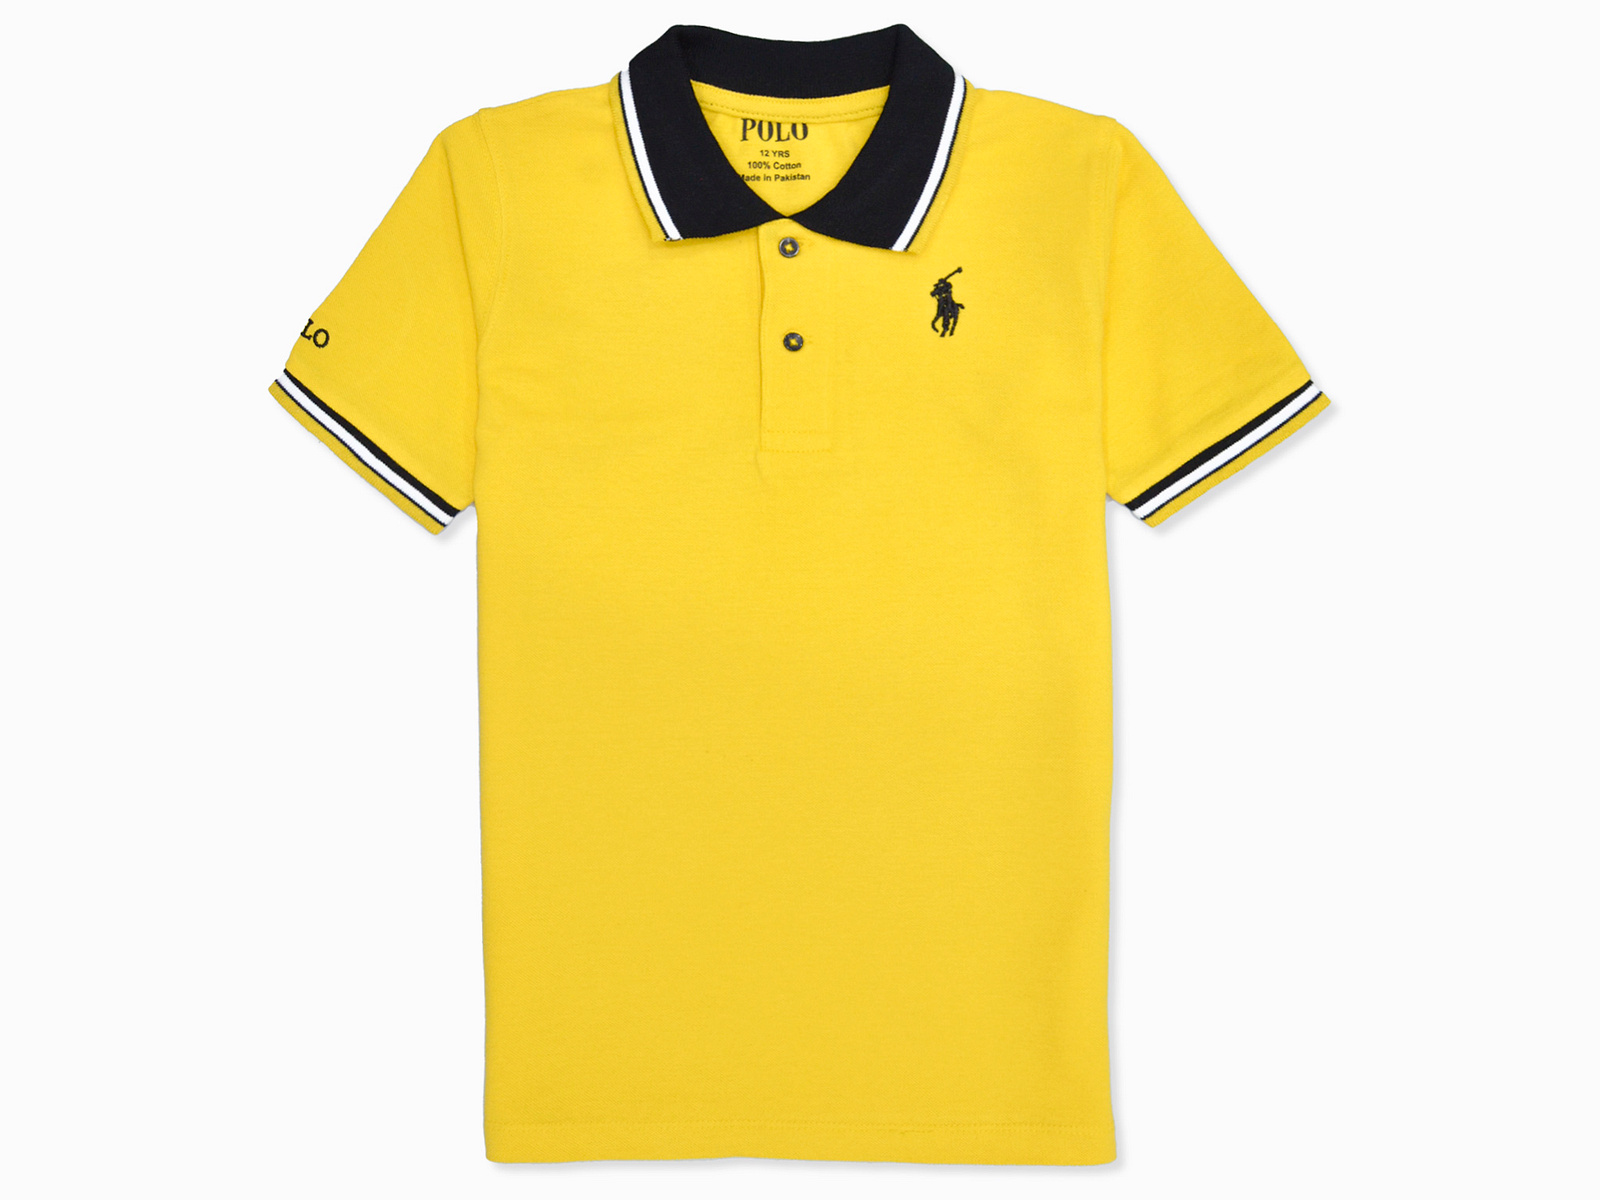 Boys polo shirts by Indusrobe on Dribbble